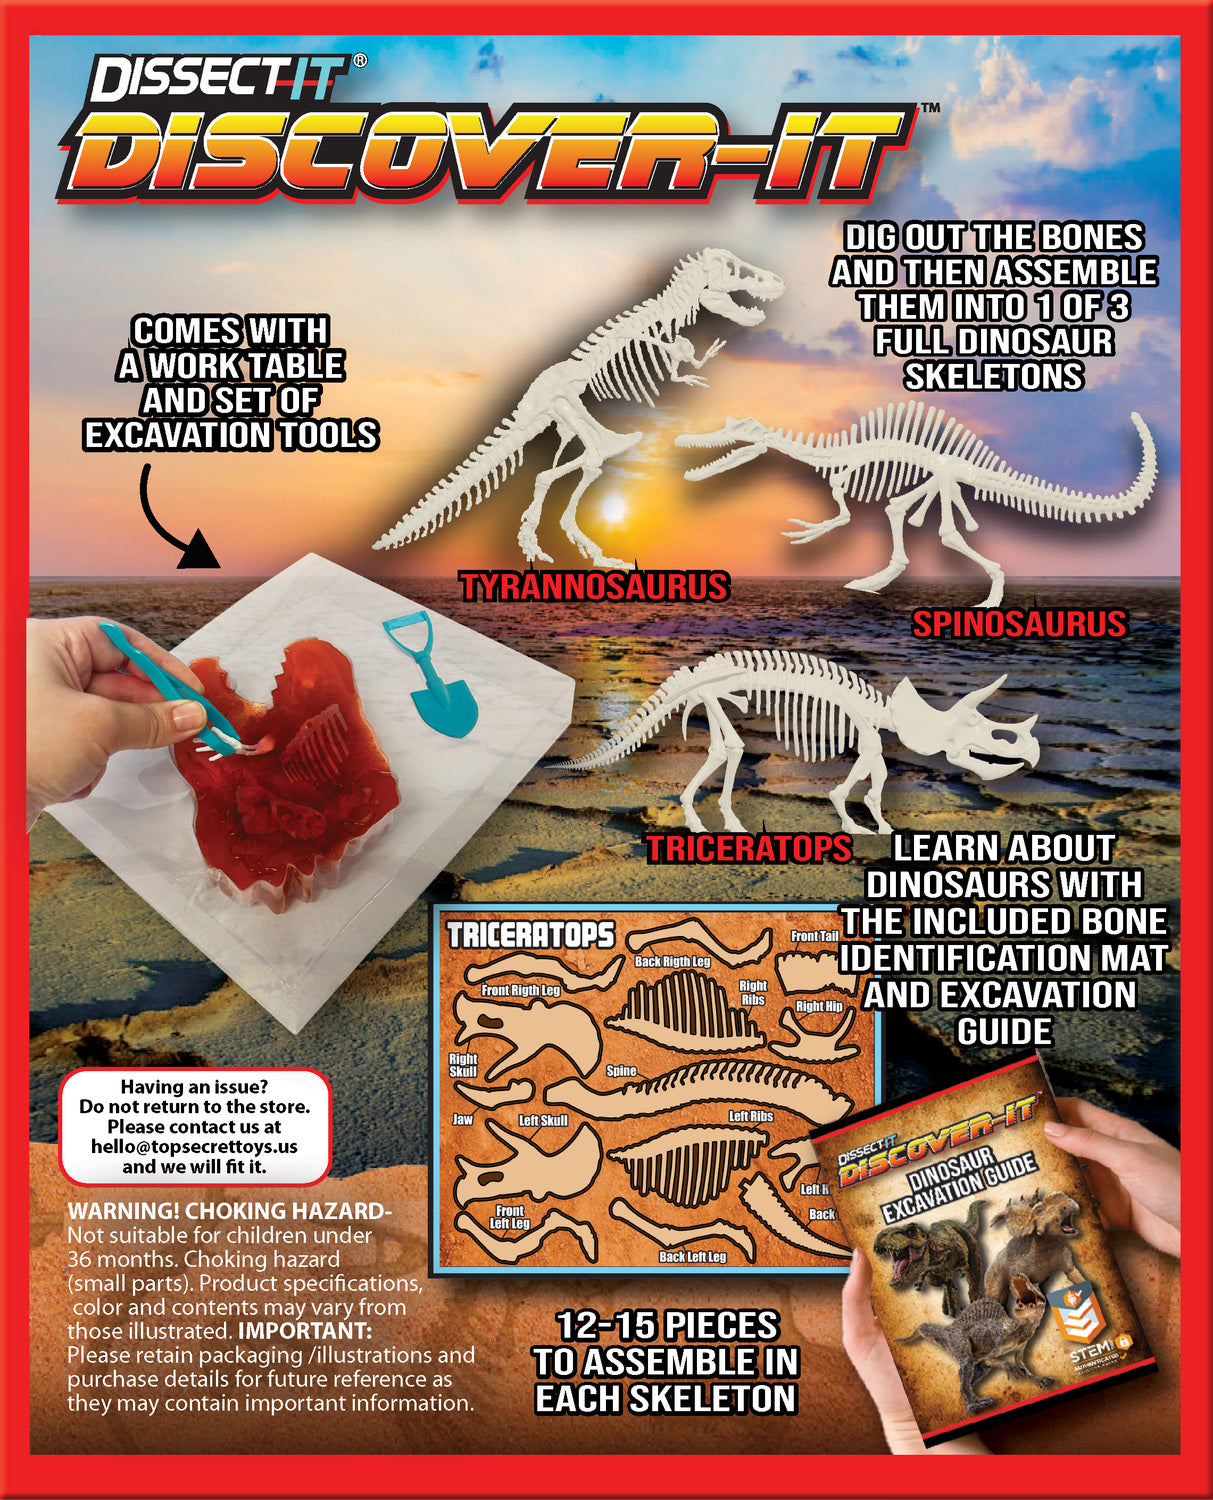 Dissect-It Discover-It Dinosaur Dig